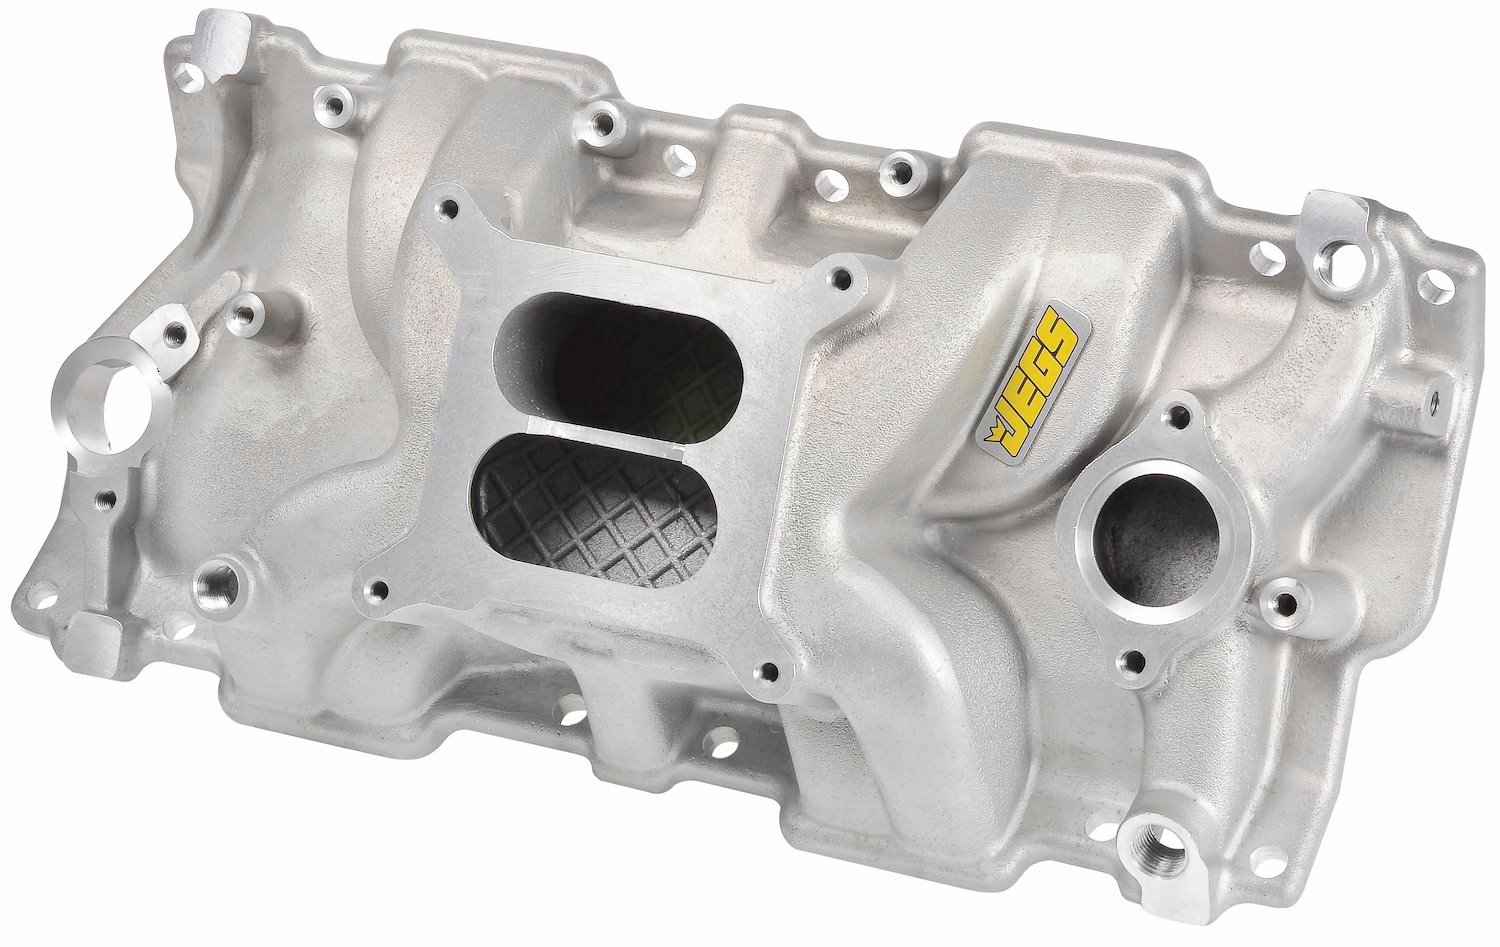 Intake Manifold for 1955-1986 Small Block Chevy 262-400 ci [Dual Plane, Natural]